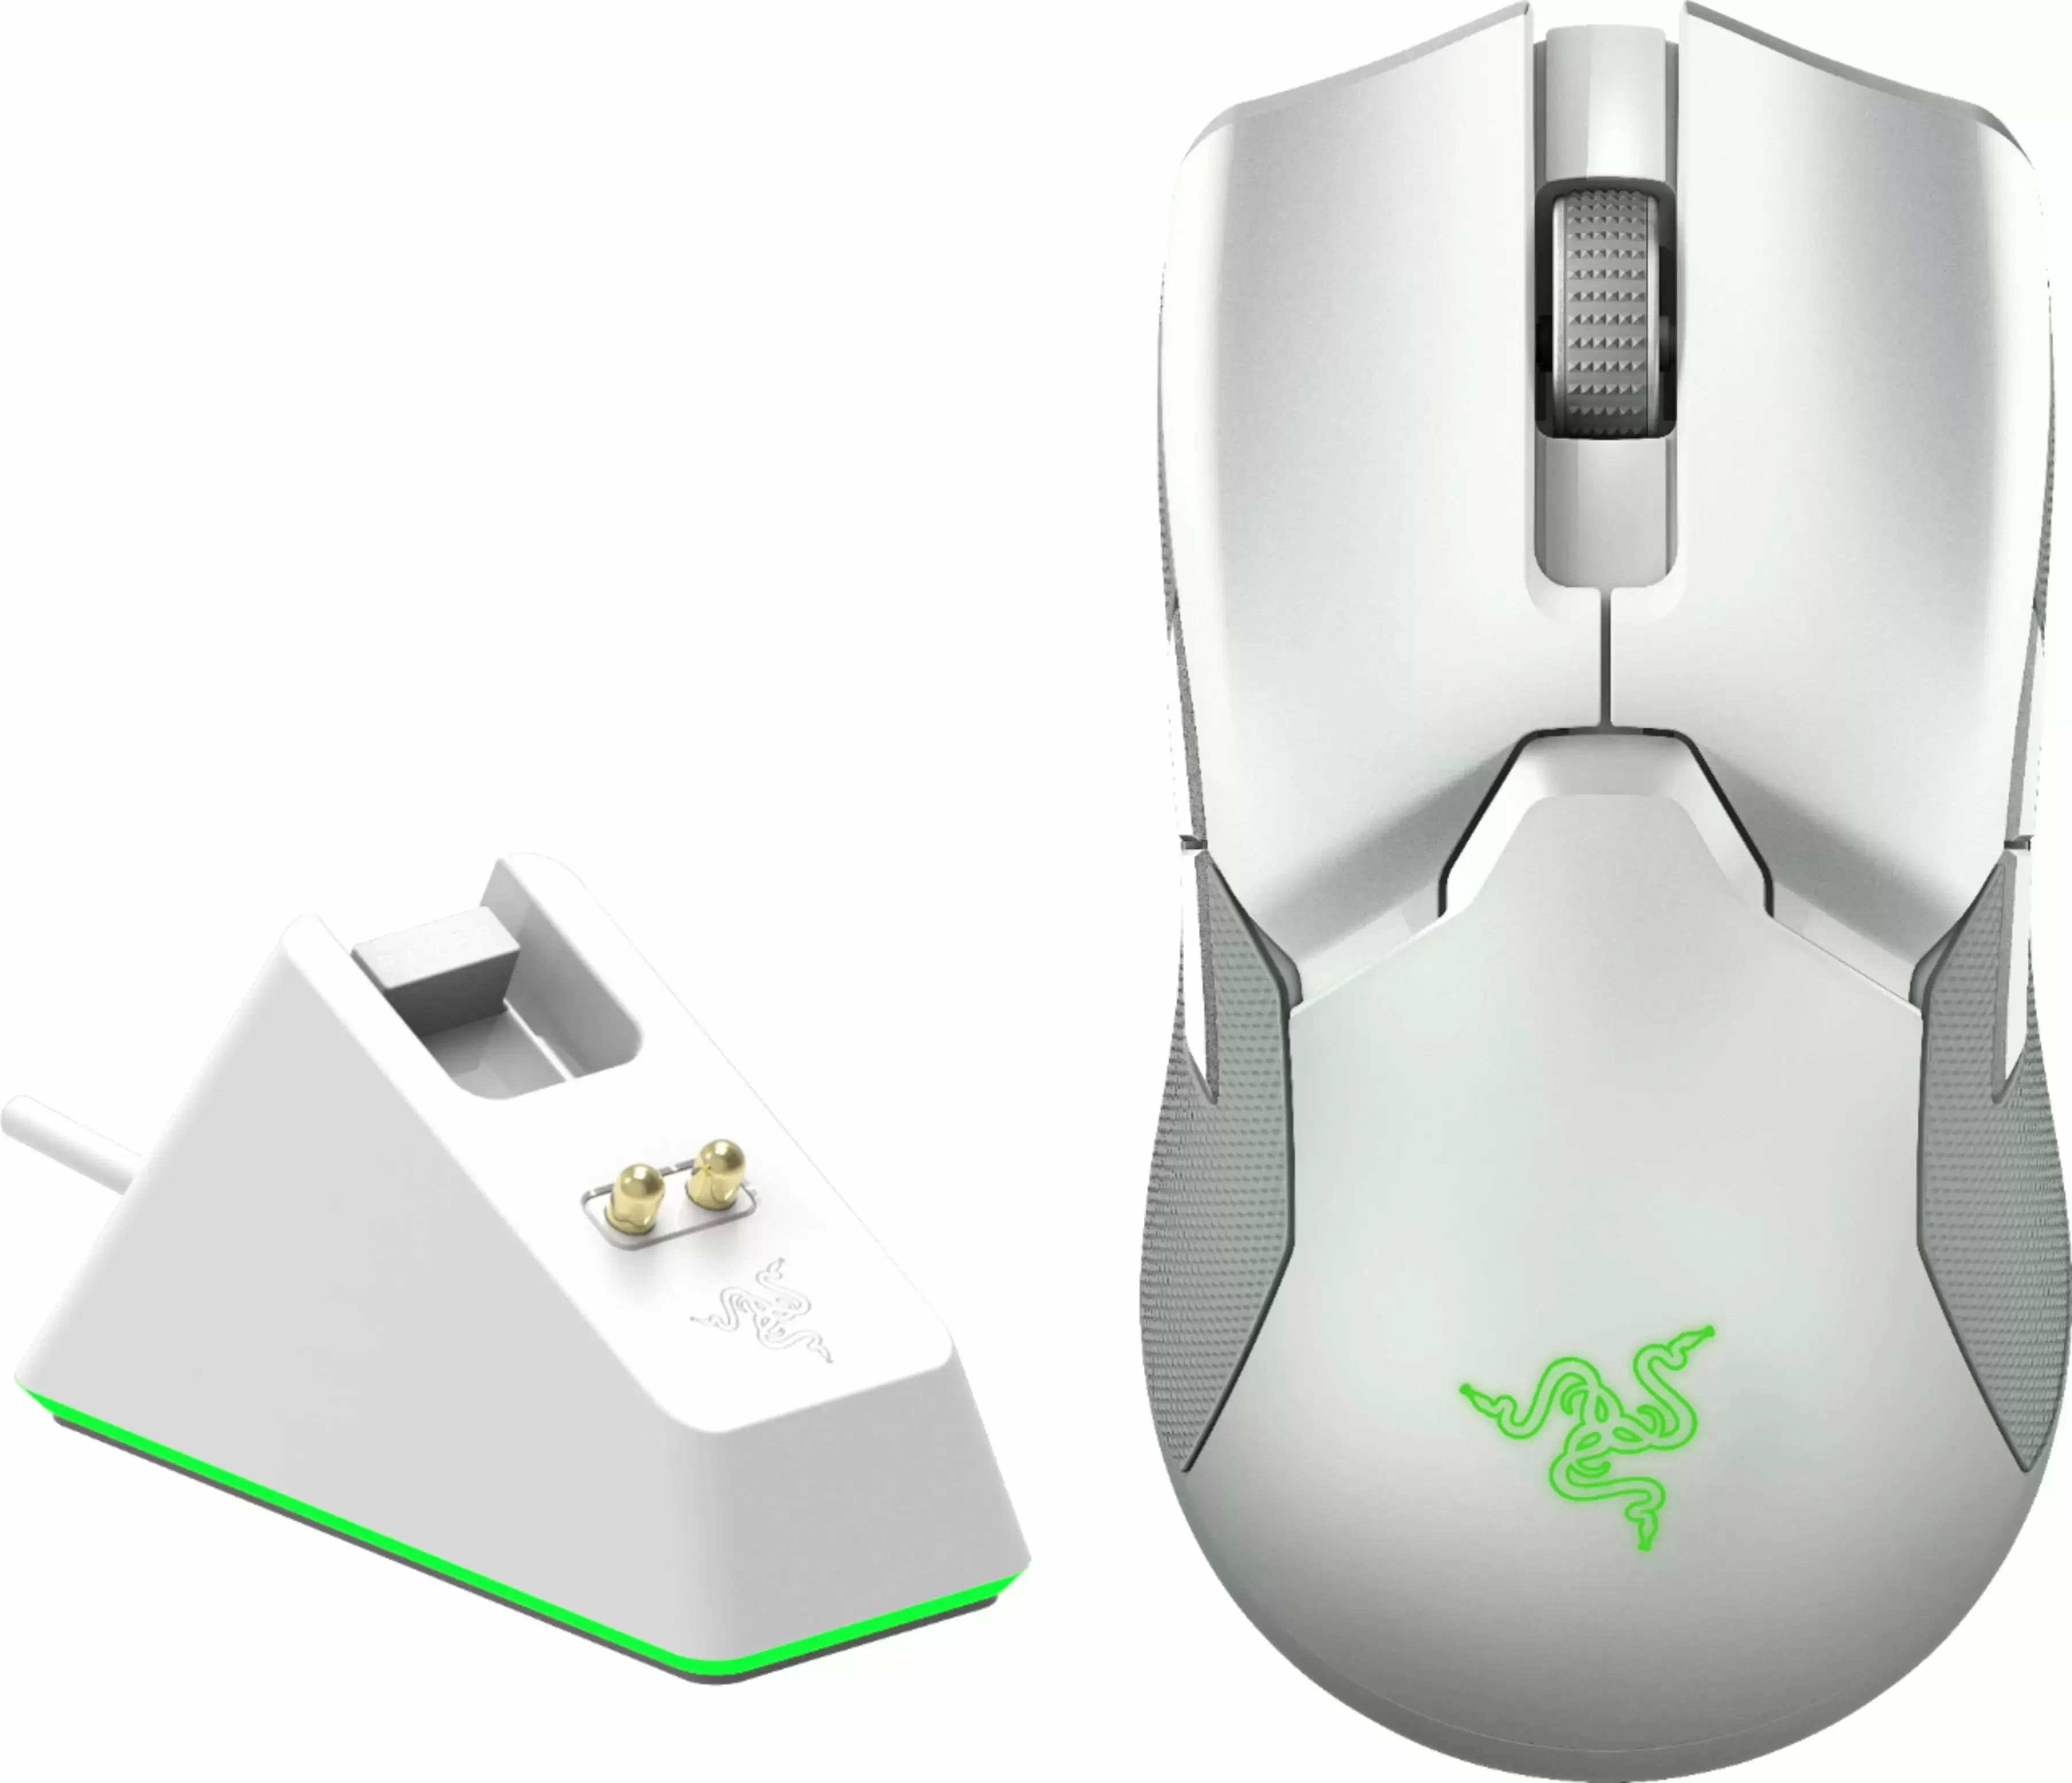 Razer Viper Ultimate Wireless Optical Gaming Mouse for $59.99 Shipped